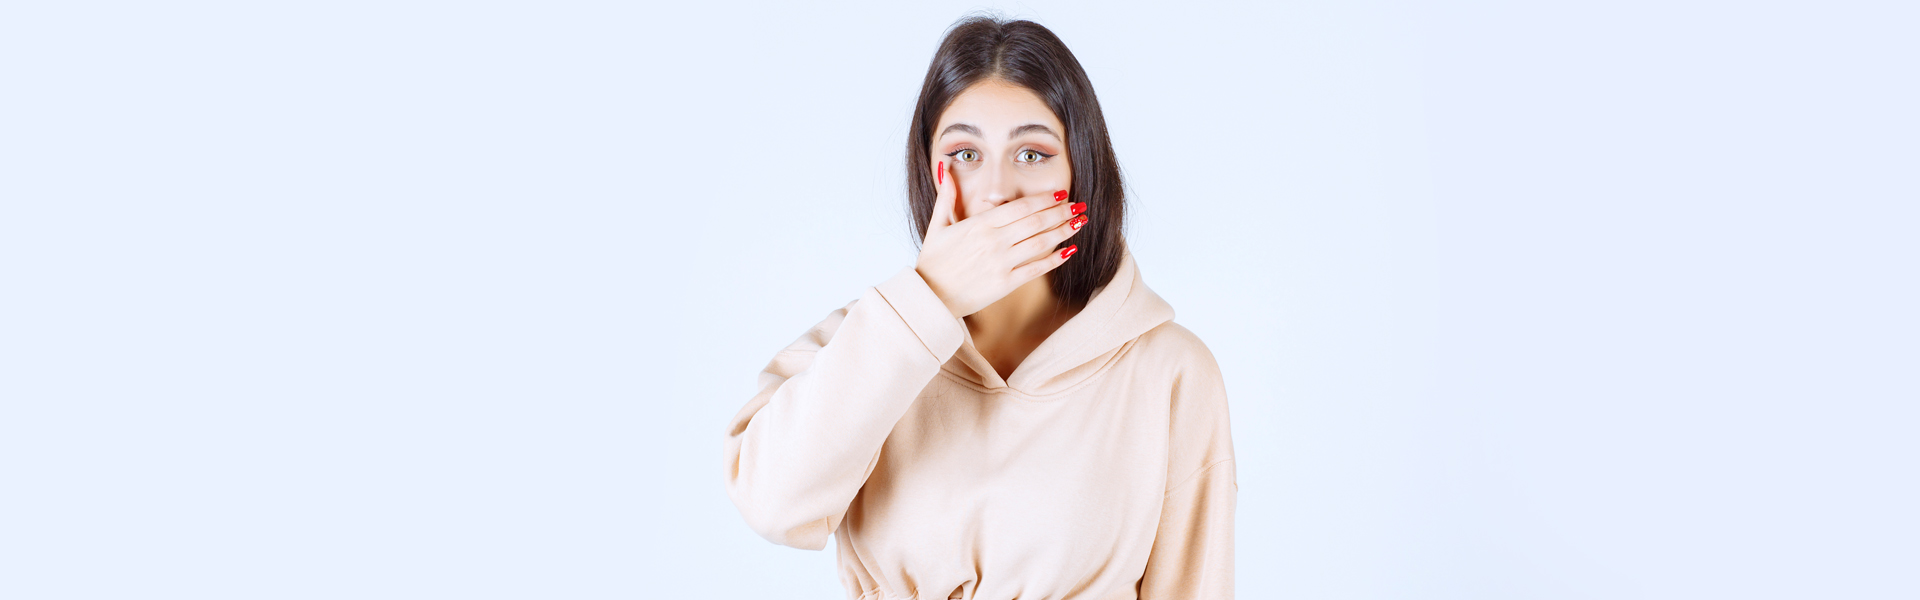 What Are the Causes of Bad Breath?